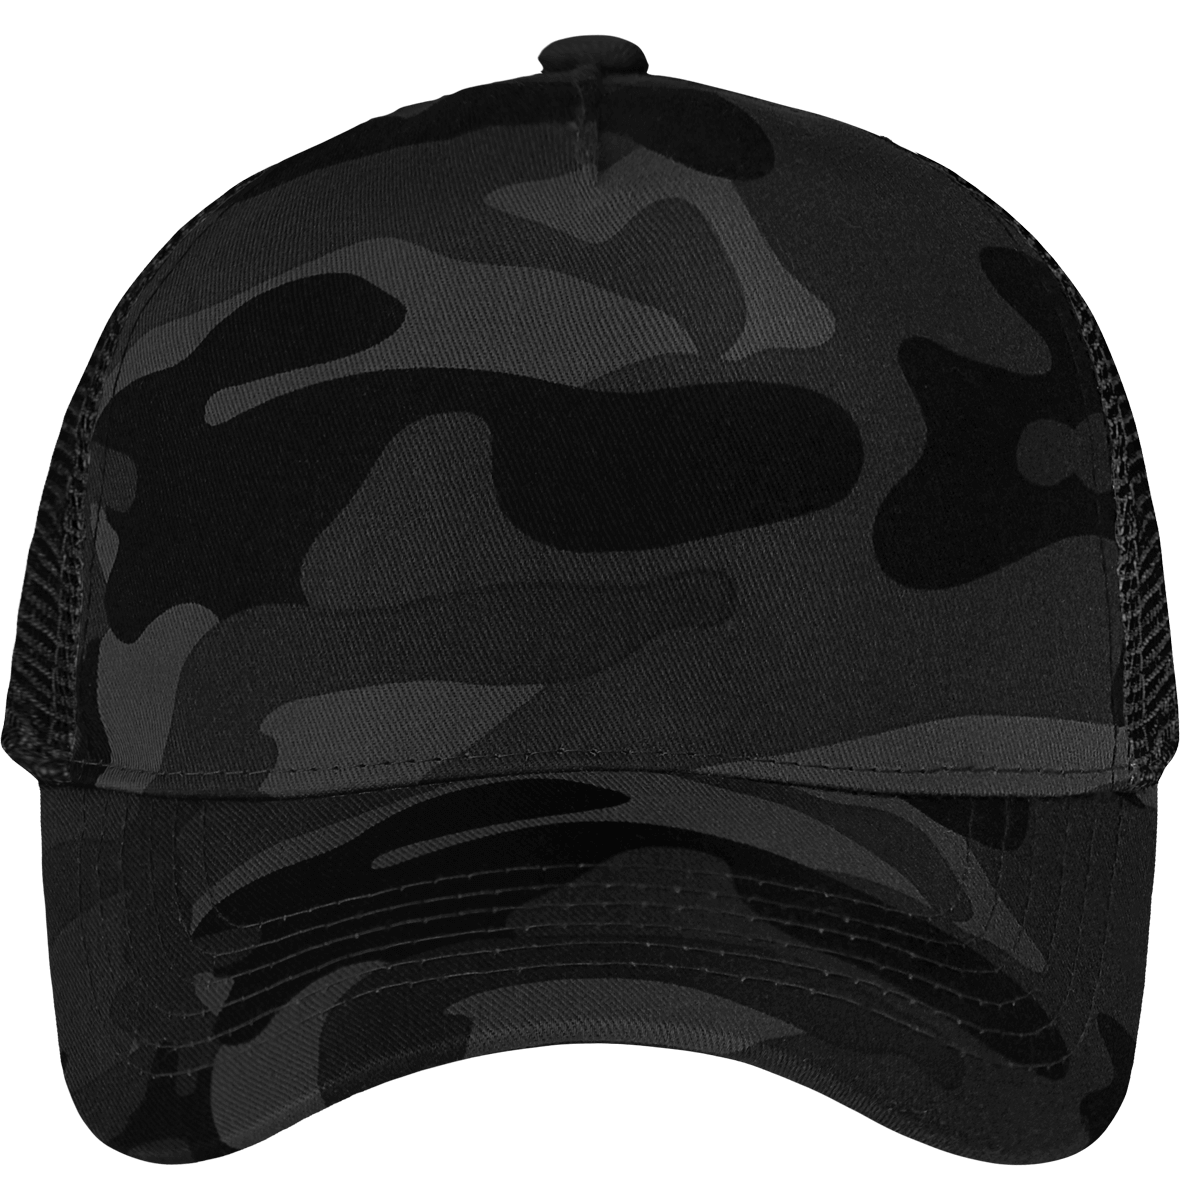 Trucker Snapback With Jungle Camouflage Patterns To Customize On Tunetoo: Midnight Camo